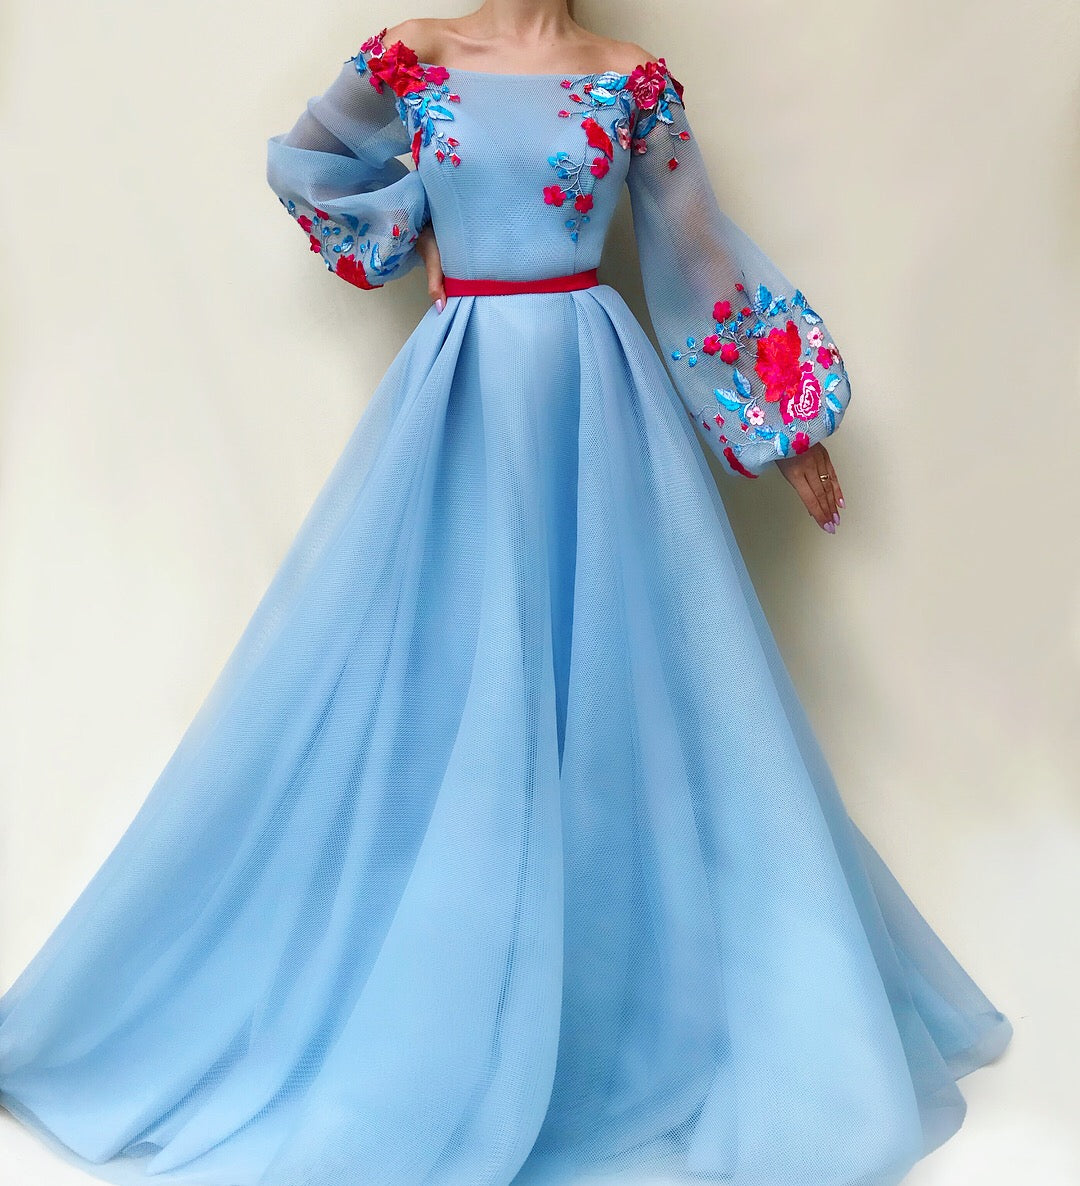 Blue A-Line dress with long off the shoulder sleeves and embroidery